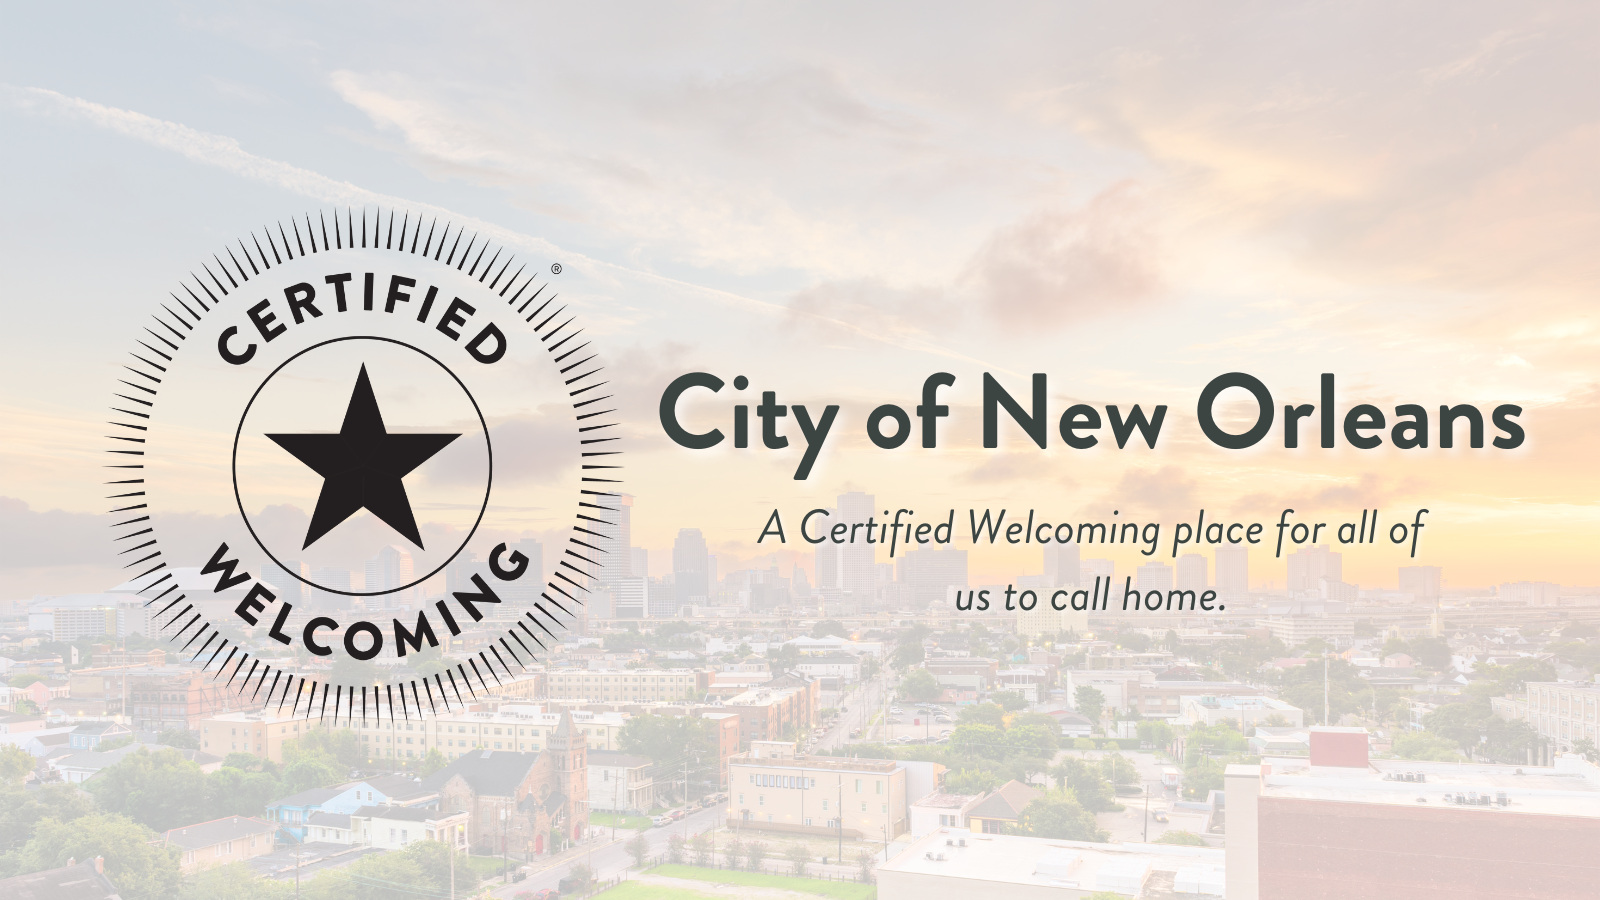 The Certified Welcoming seal and text that reads "City of New Orleans: A Certified Welcoming place for all of us to call home." is overlaid on a photo of New Orlean's cityscape